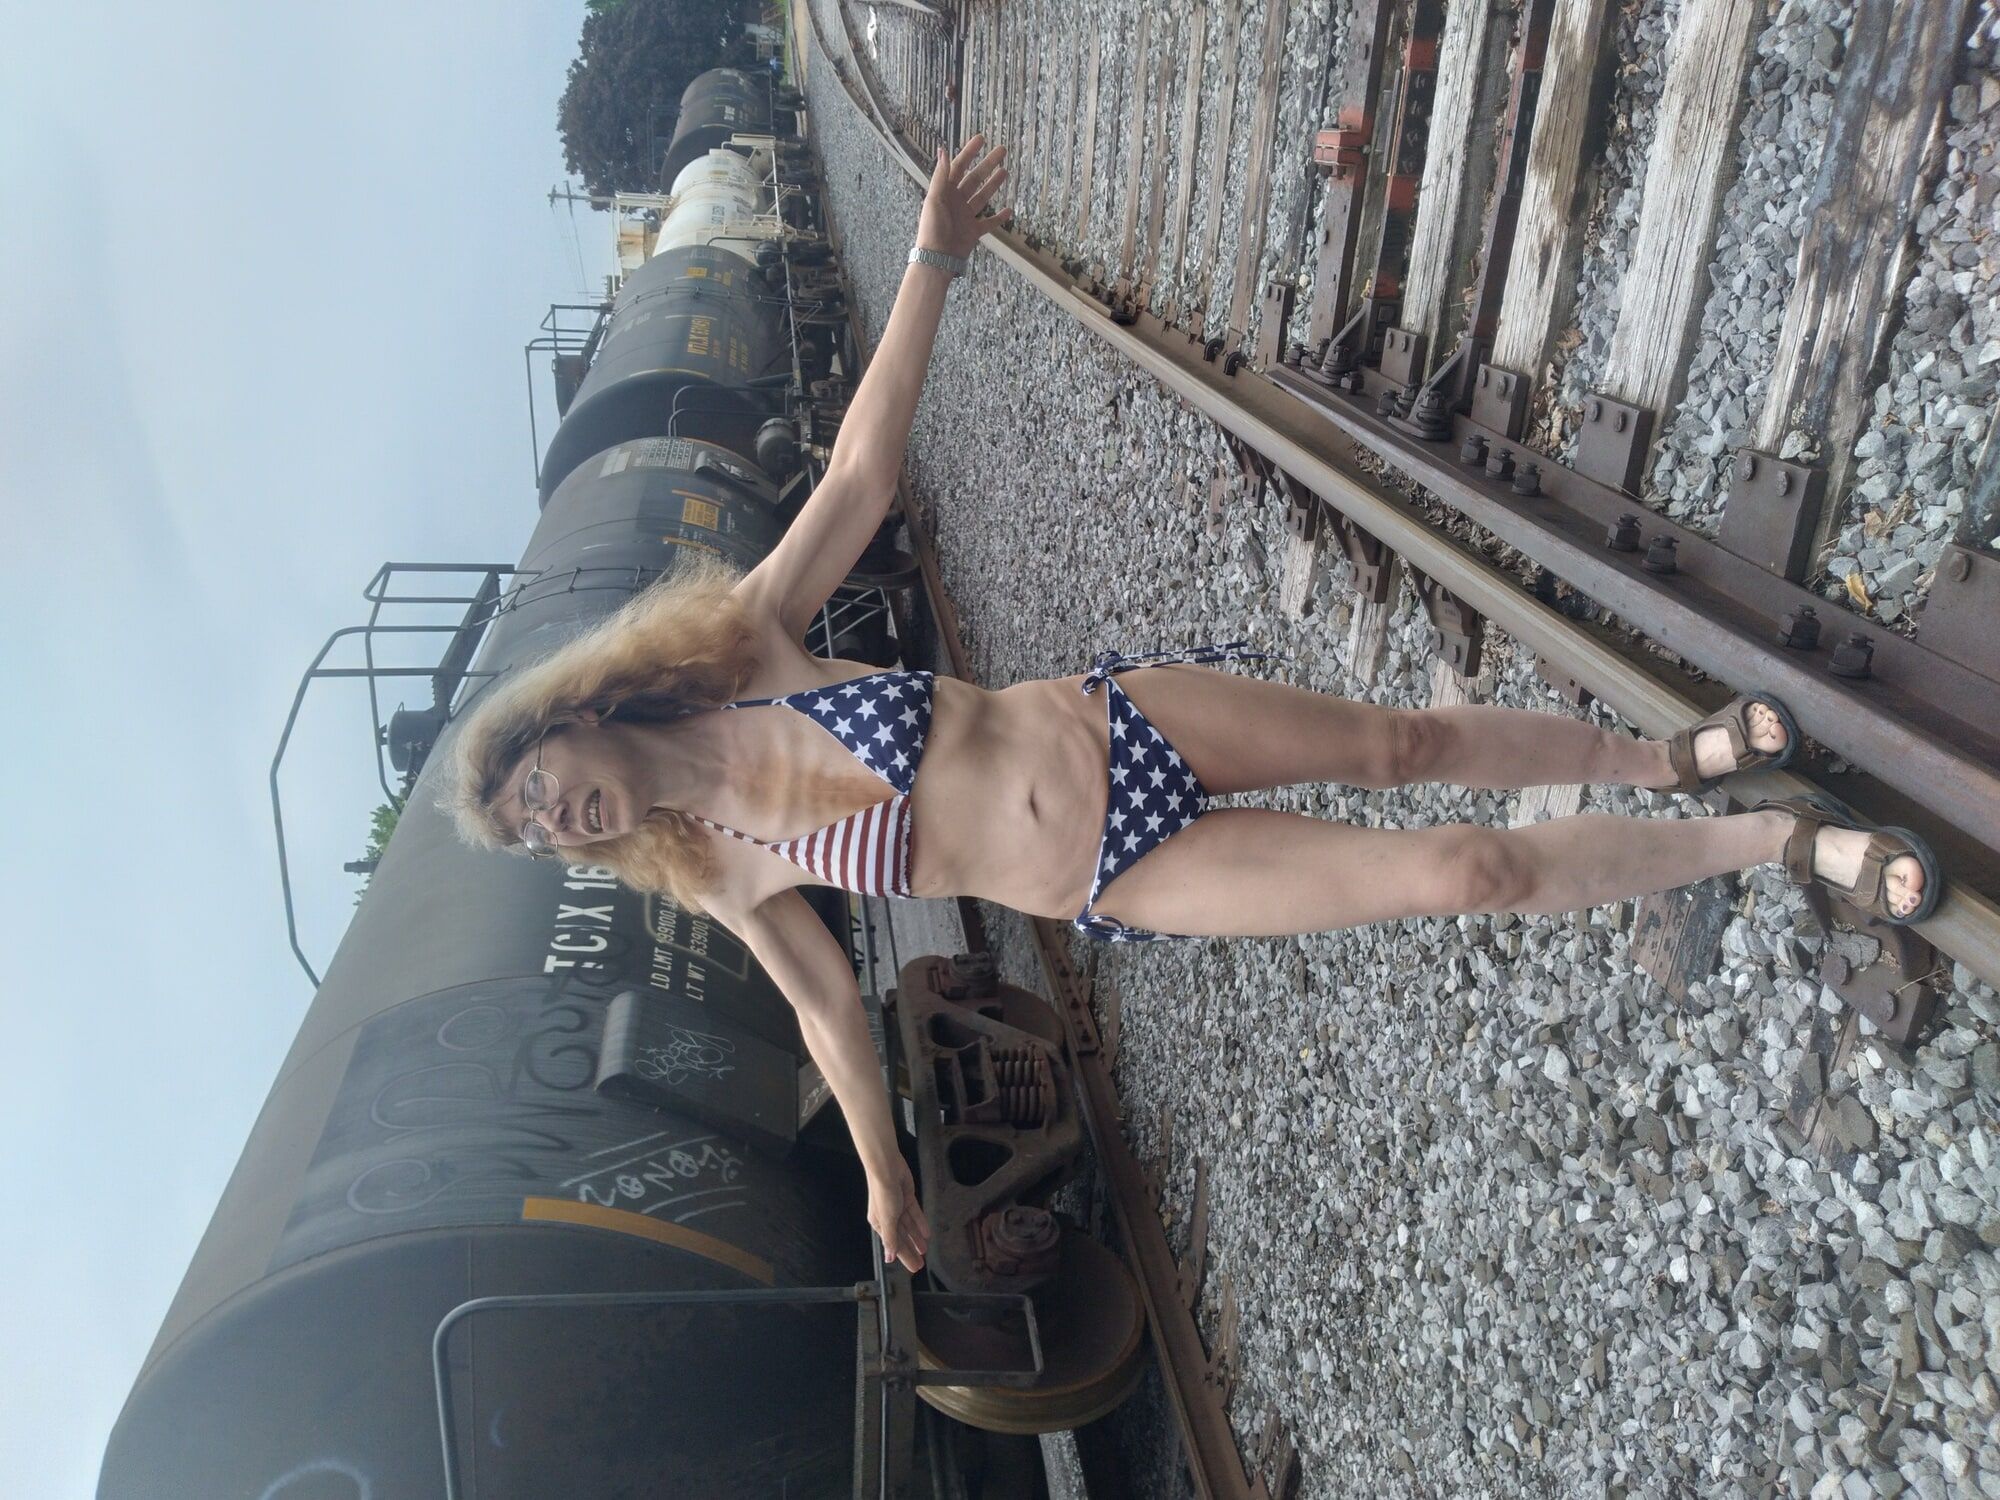 American Train. July 4th release. My best photo set to date. #43